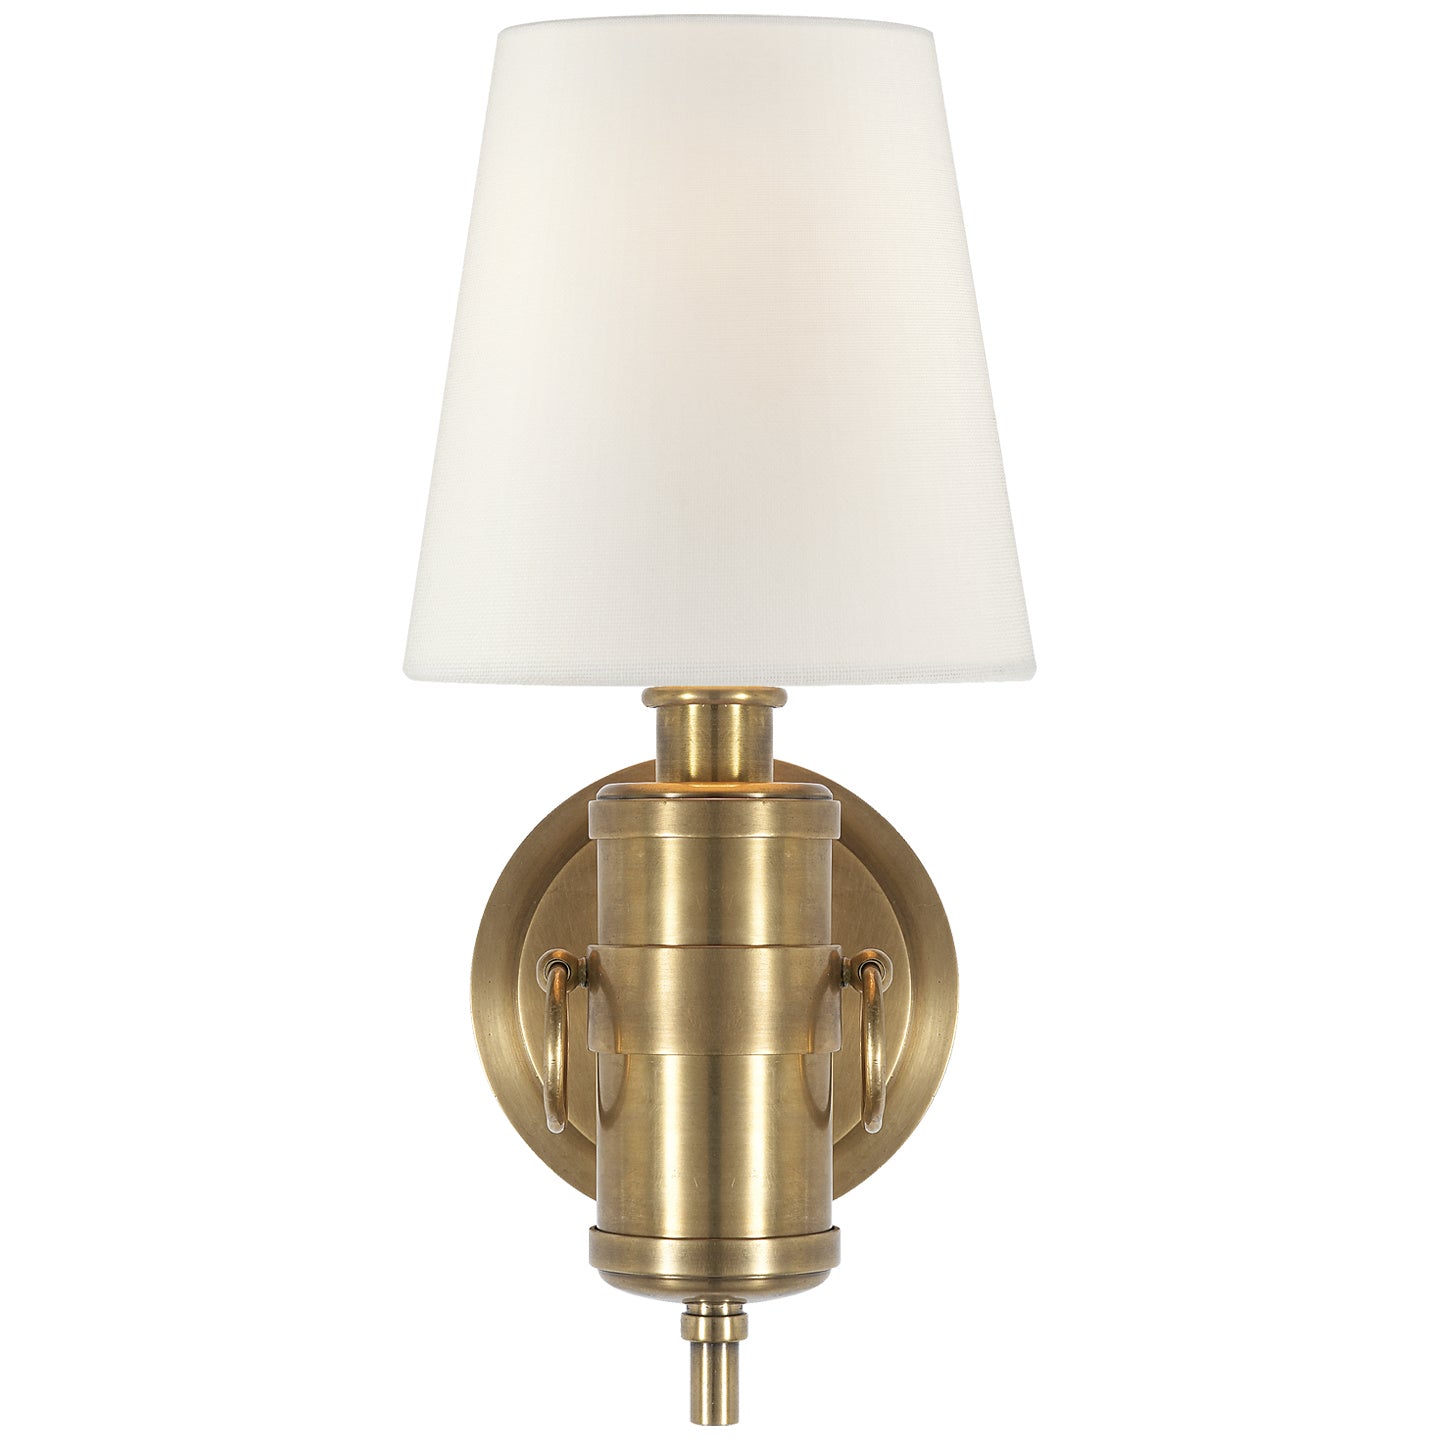 Visual Comfort Signature - TOB 2730HAB-L - One Light Wall Sconce - Jonathan - Hand-Rubbed Antique Brass